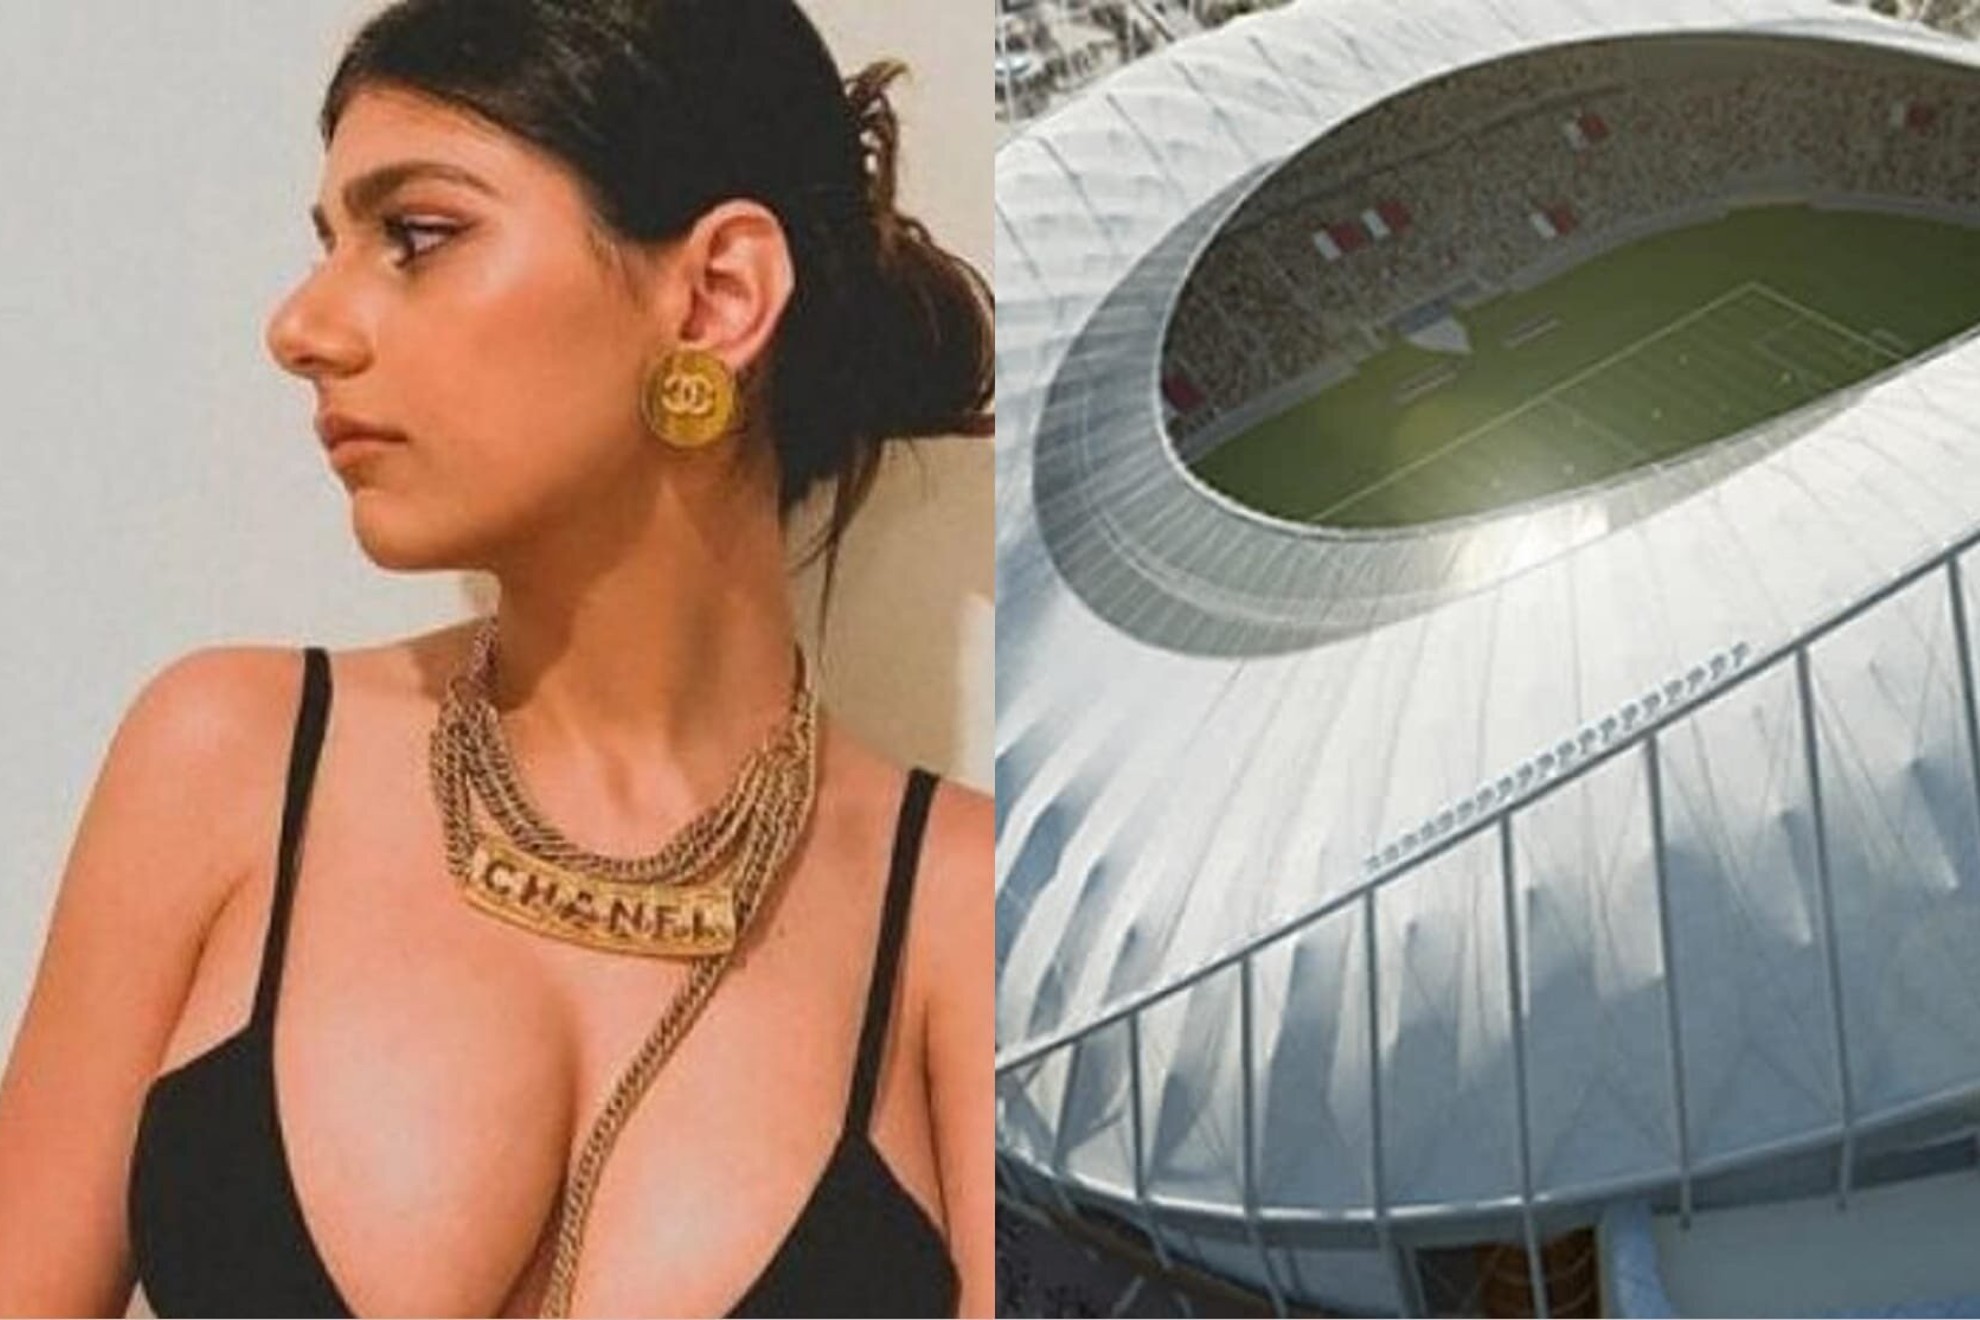 A journalists surprise slip involving Mia Khalifa during a World Cup broadcast